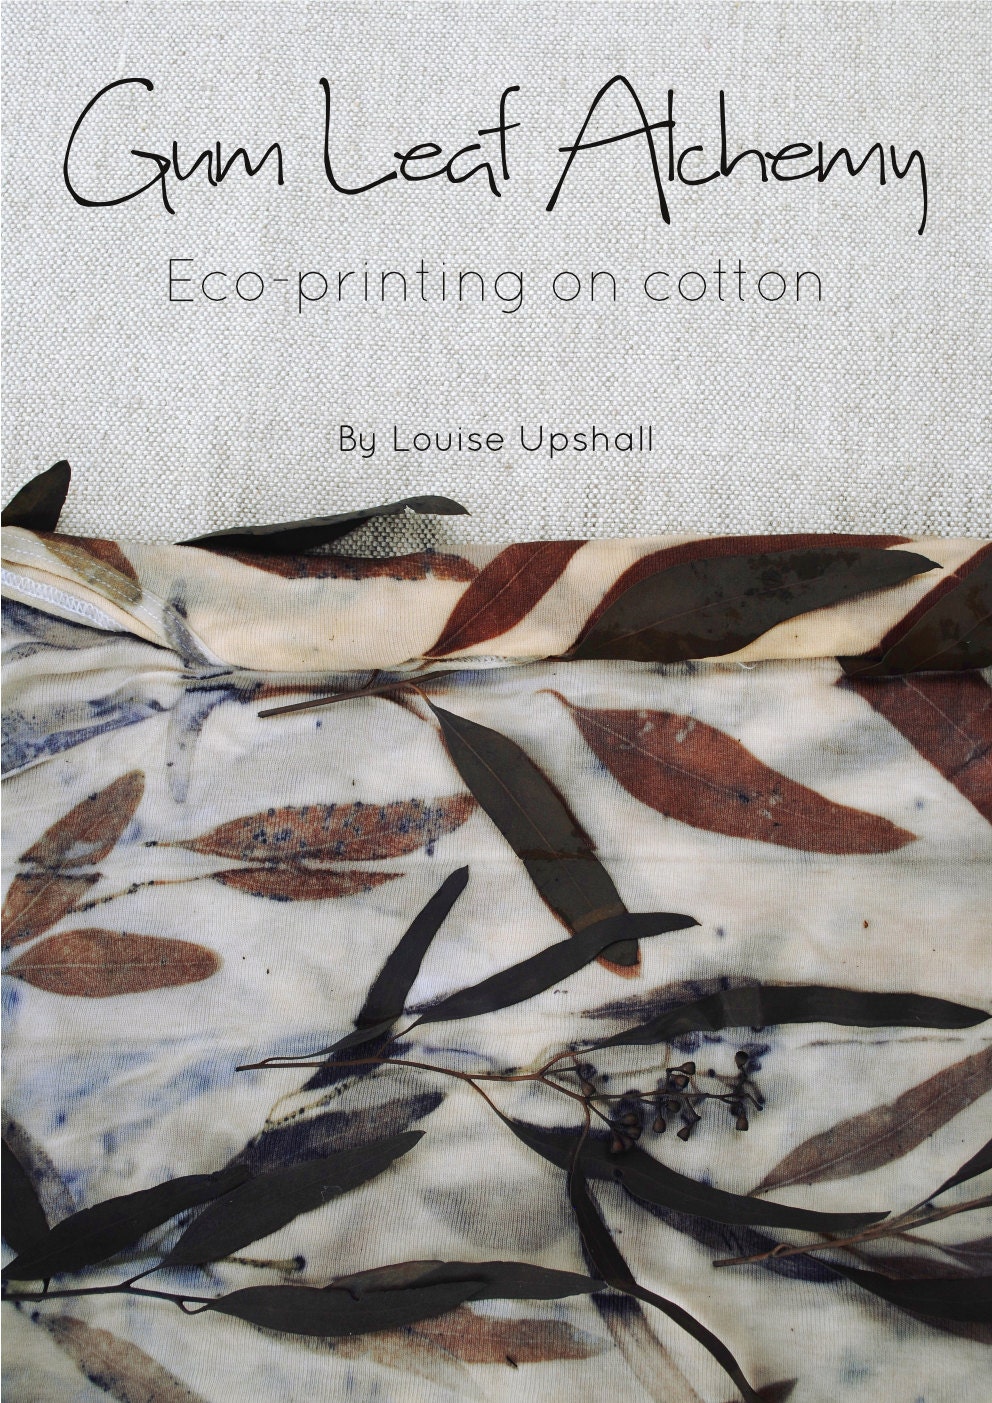 Ebook // Eco-printed Clothing and Fabric Etsy